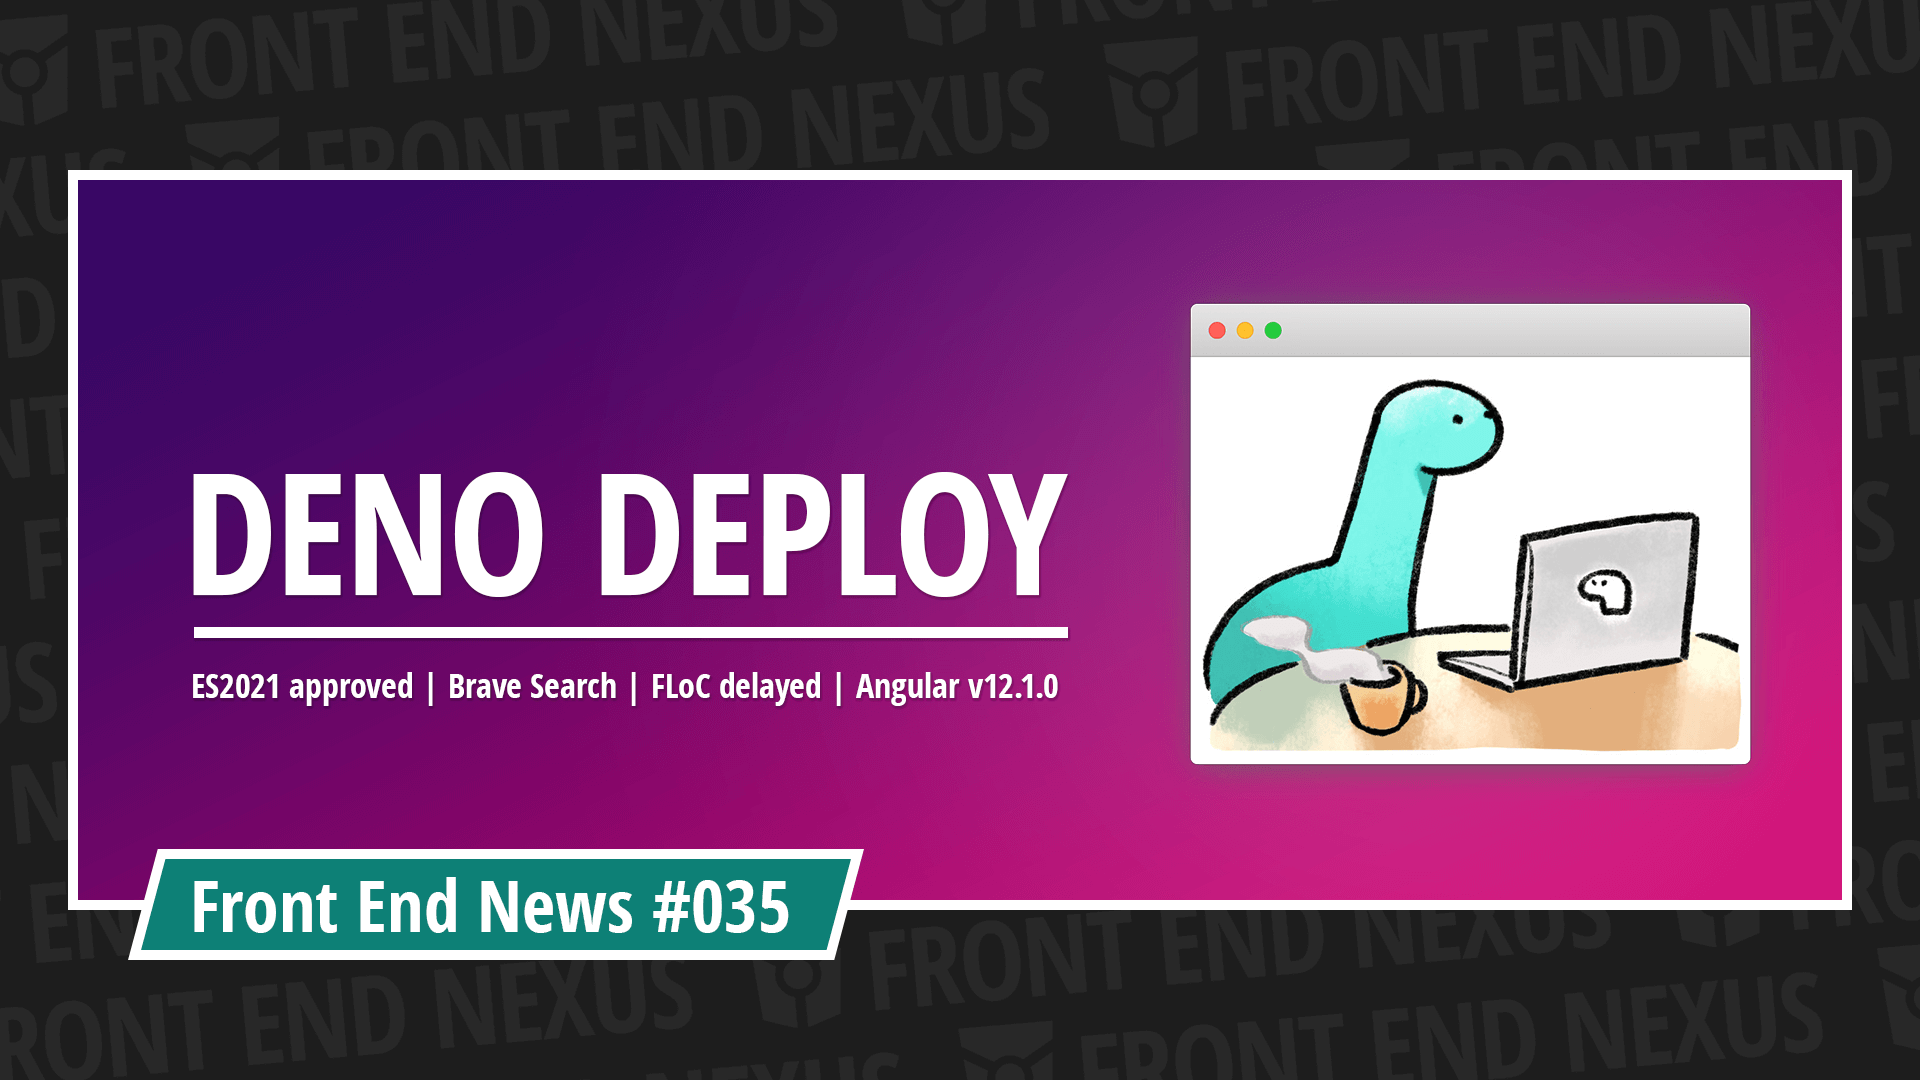 Introducing Deno Deploy Beta, ES2021 has been approved, Google delays FLoC, and the launch of Brave Search | Front End News #035